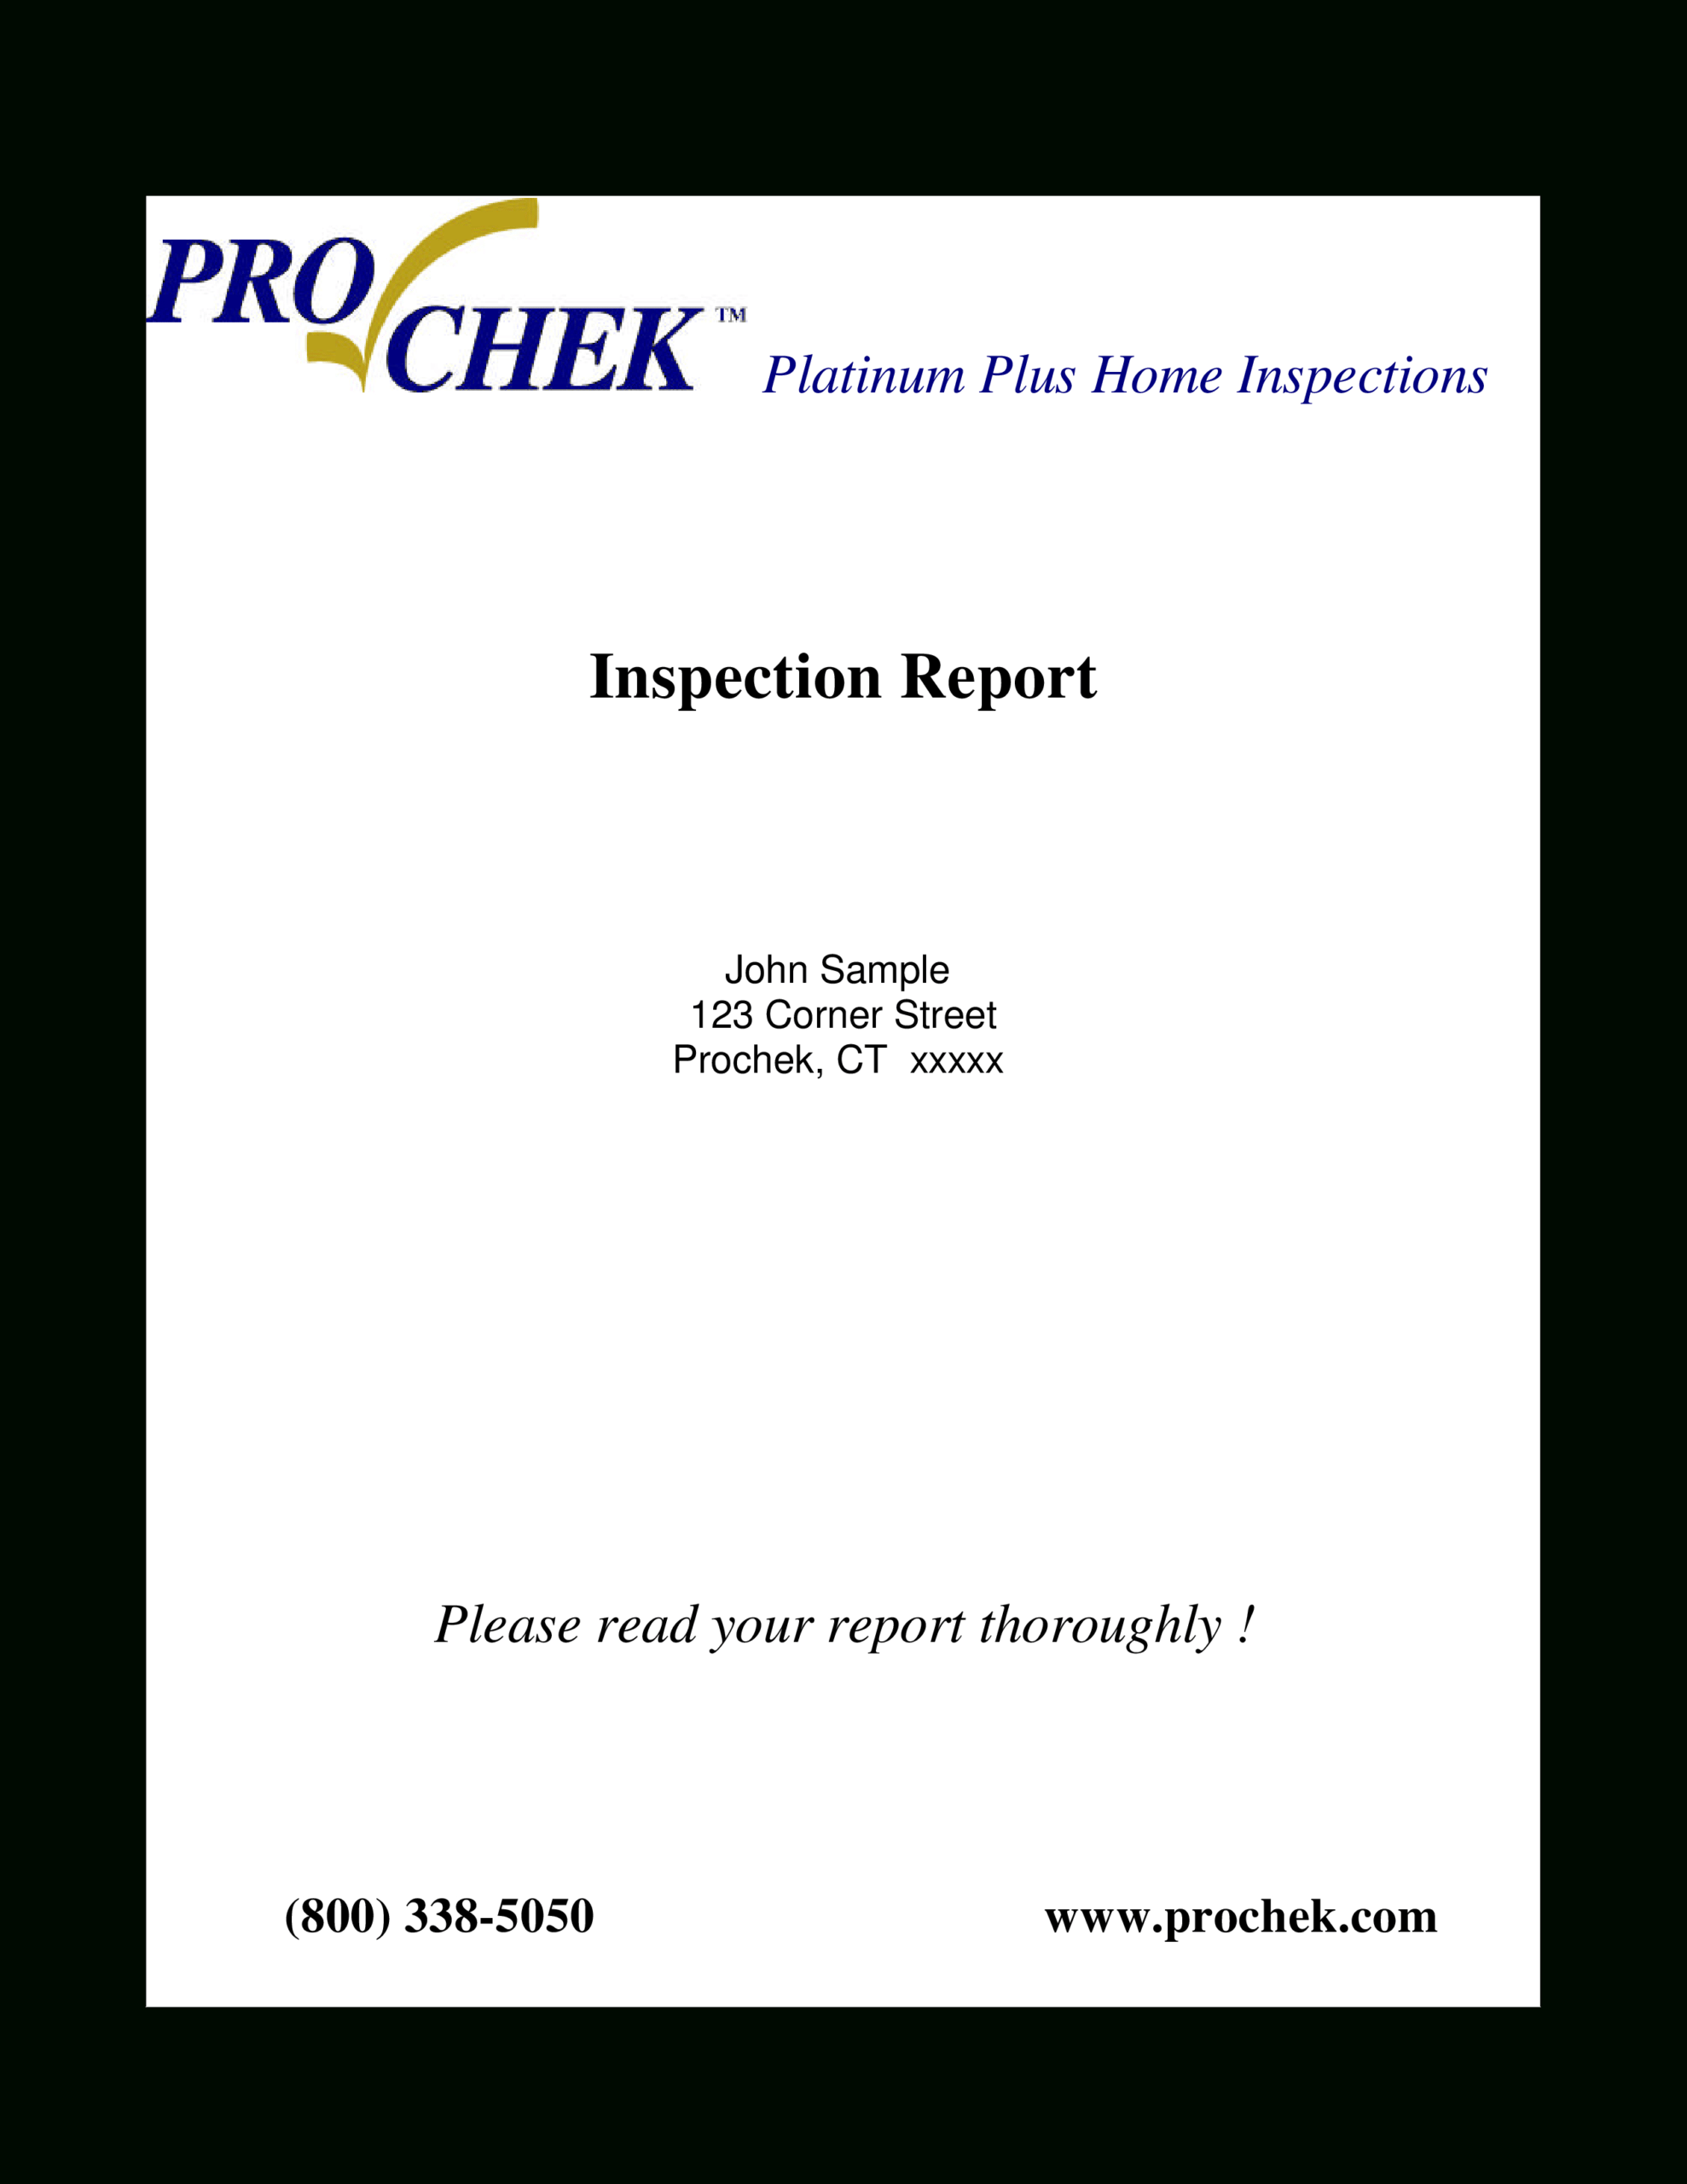 Home Inspection Report | Templates At Allbusinesstemplates With Regard To Home Inspection Report Template